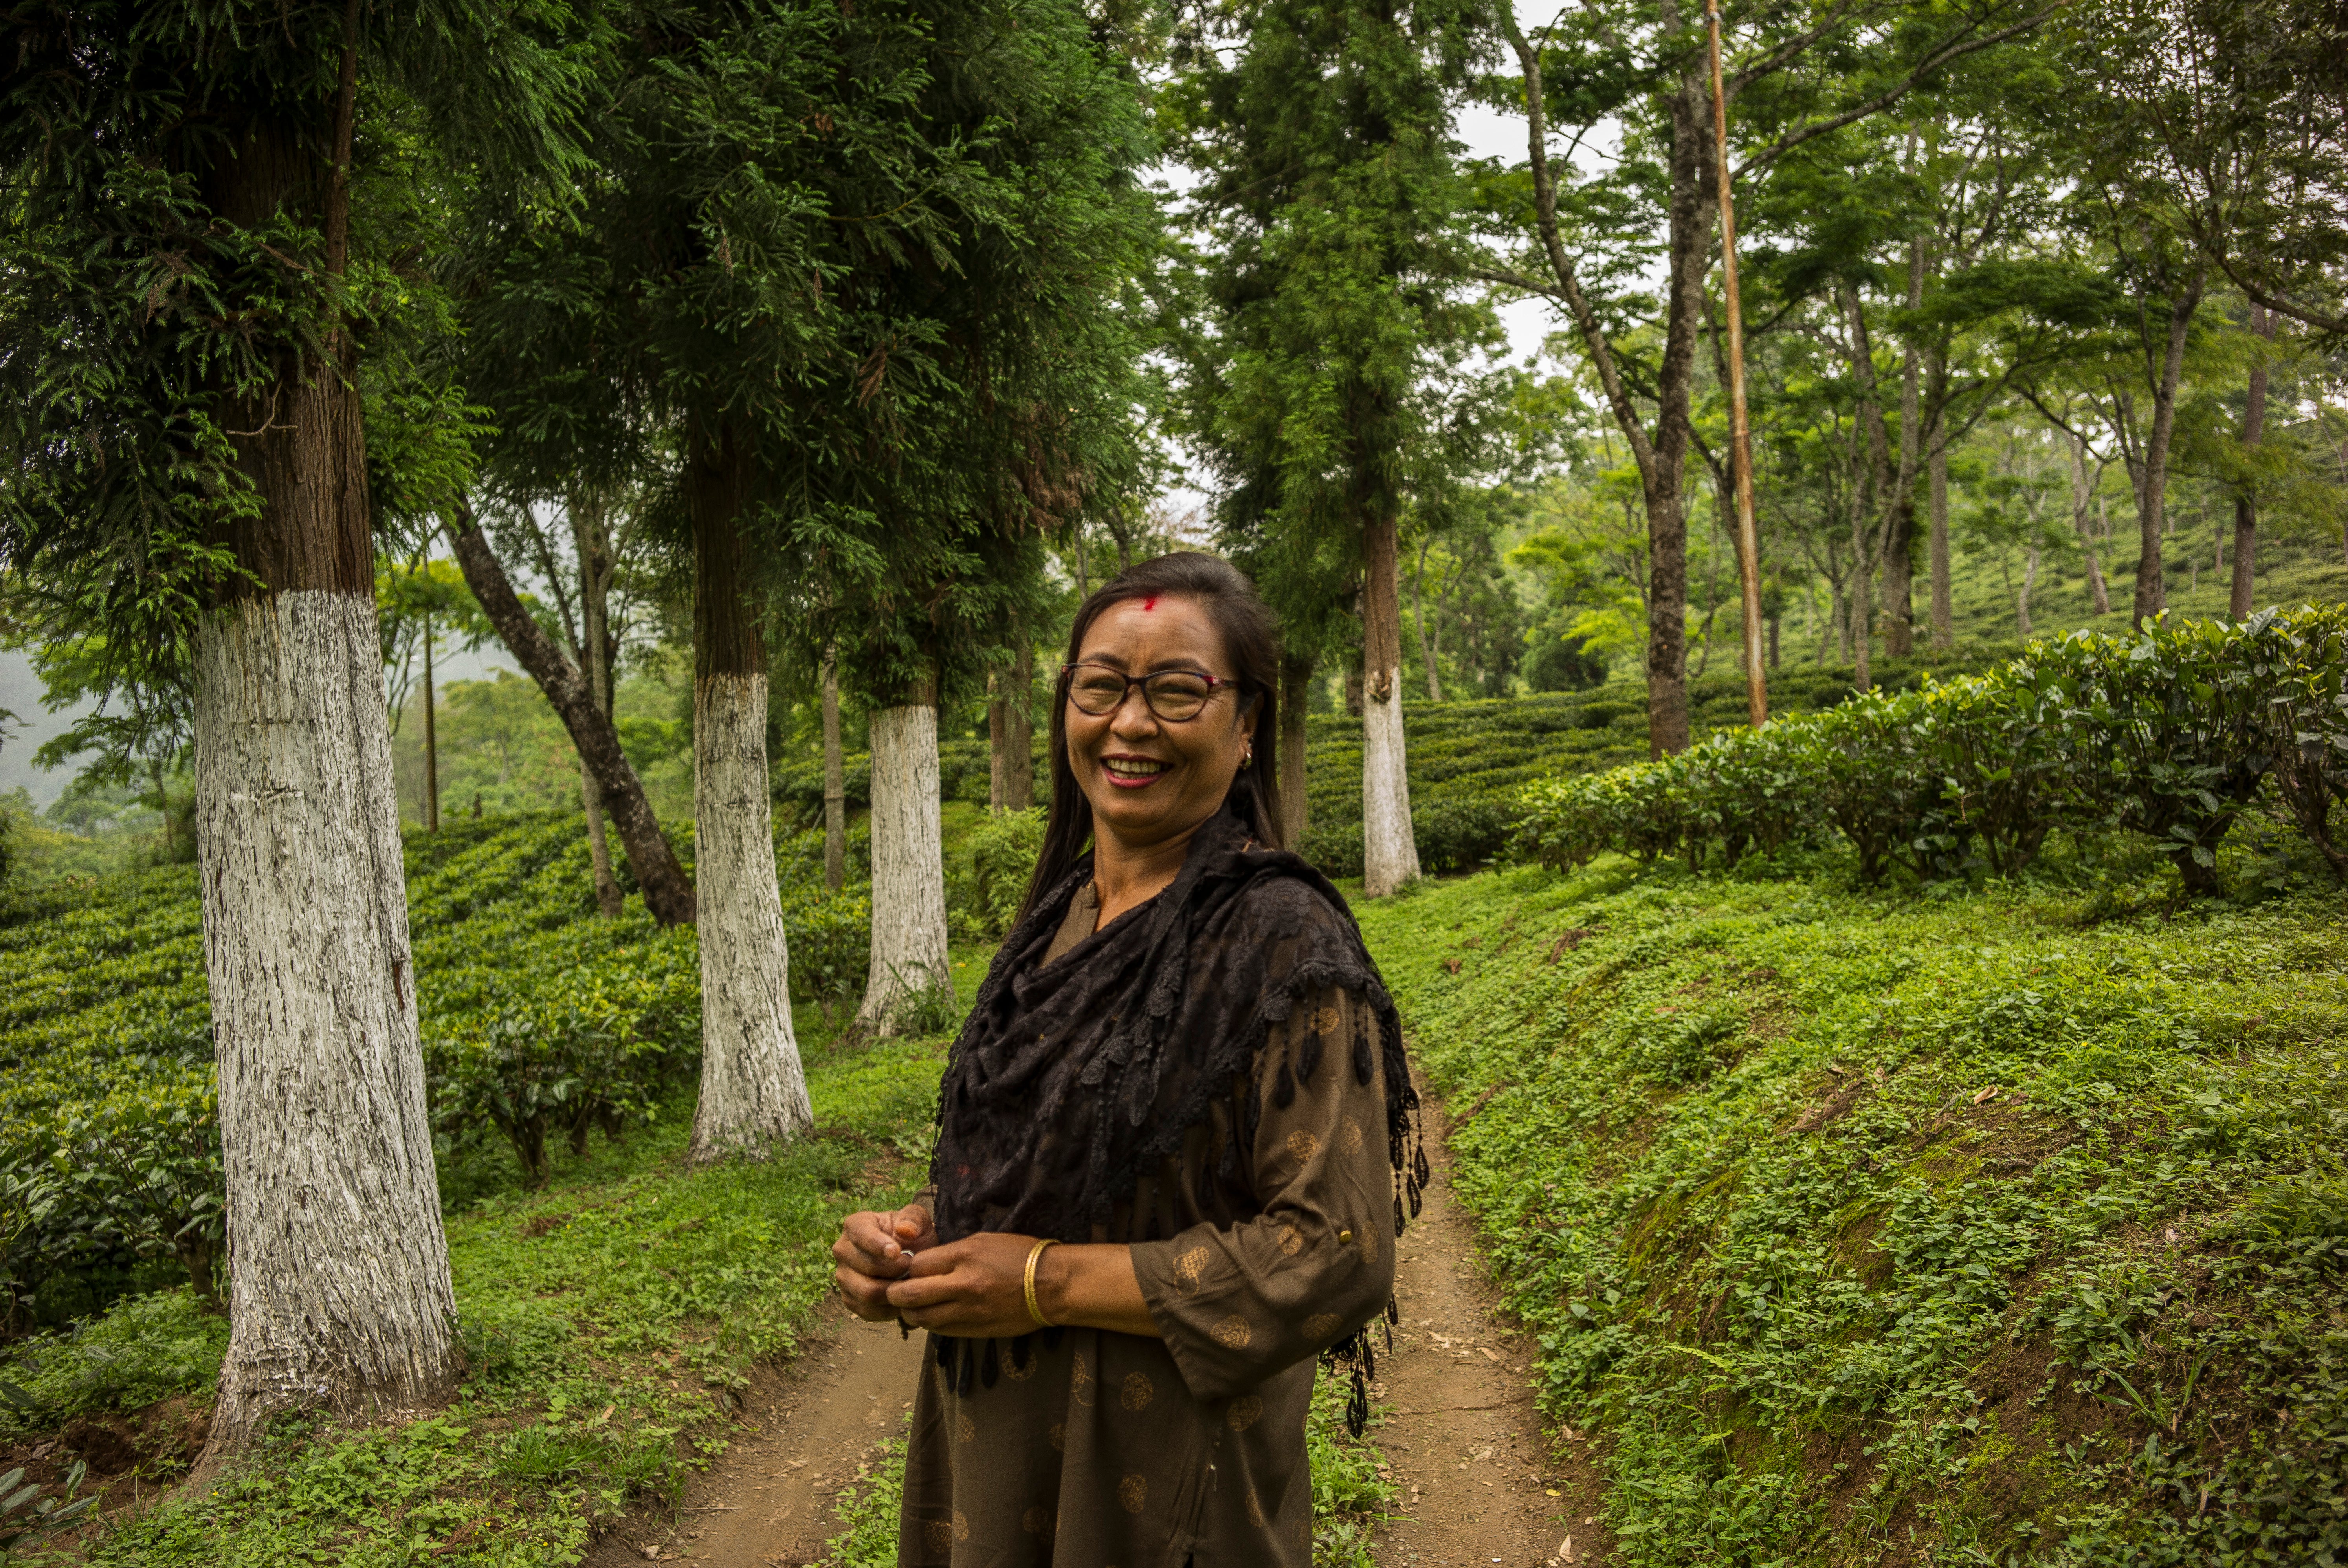 Jalu, a supervisor at the Nagrifarm tea garden of West Bengal’s Darjeeling district, explained that women often suffer from terrible rashes because of wearing the same sanitary pad for long hours